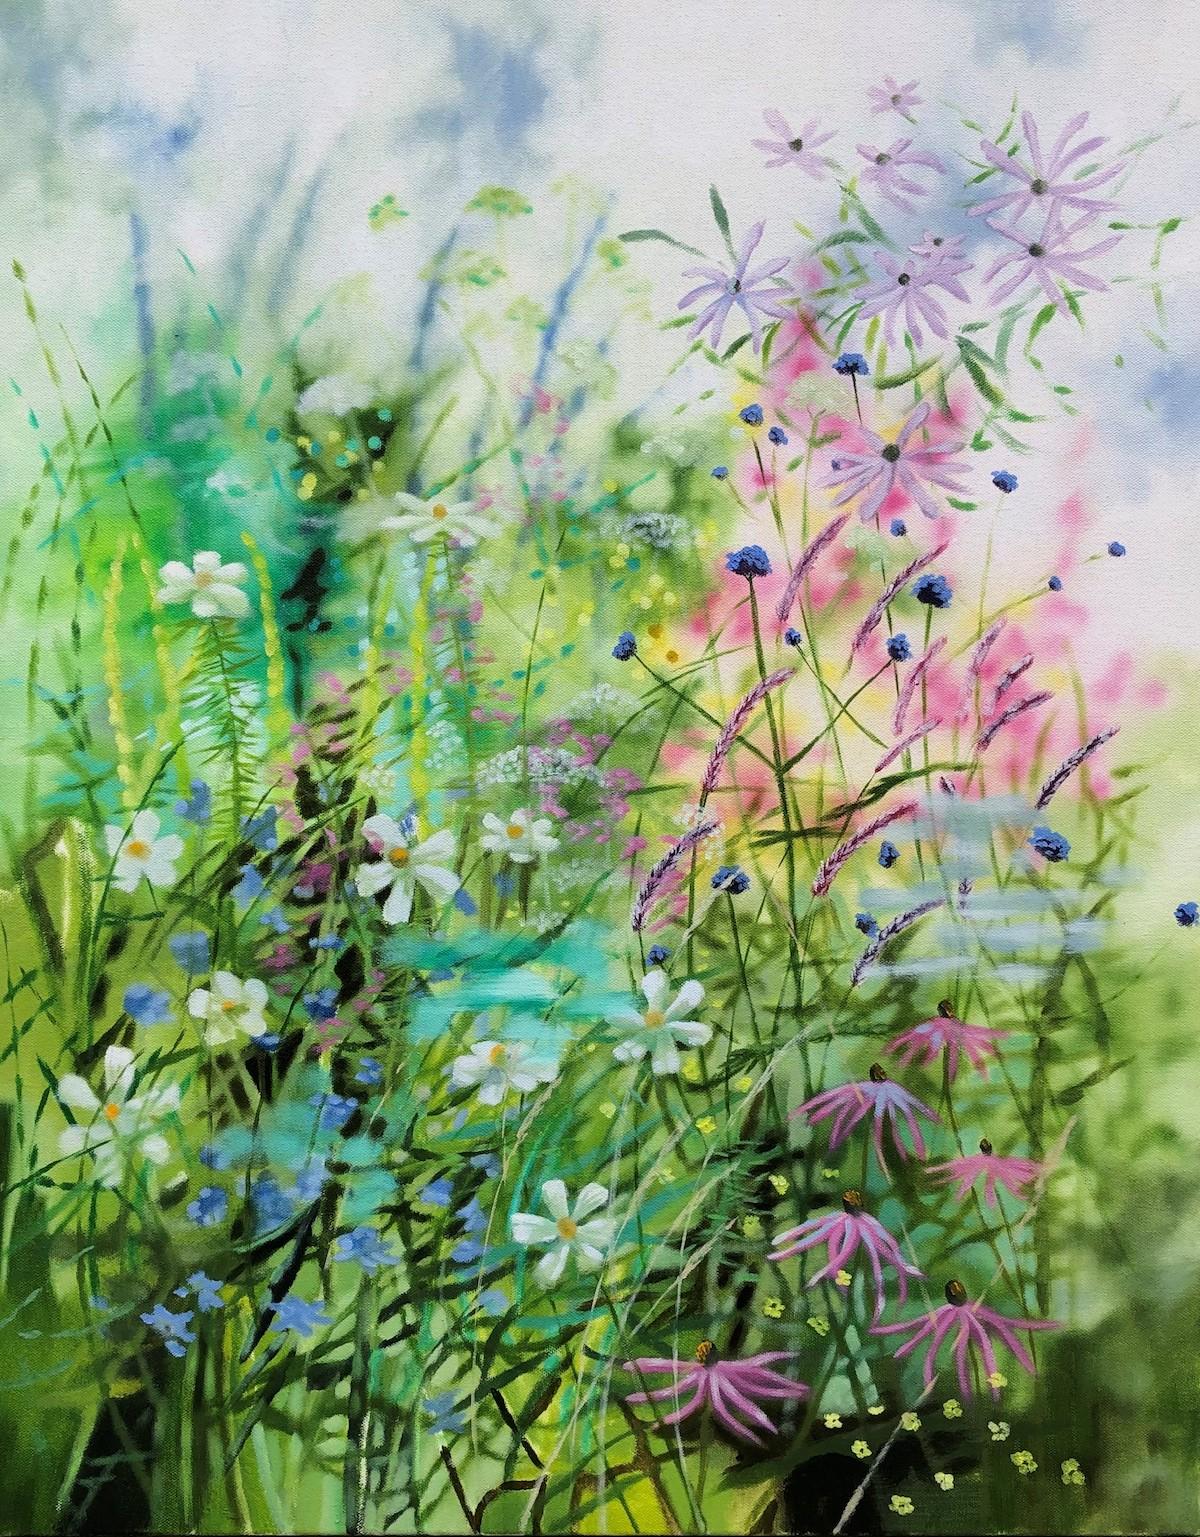 Distant Days II by Dylan Lloyd, Floral Art, Meadow Art, Landscape painting 